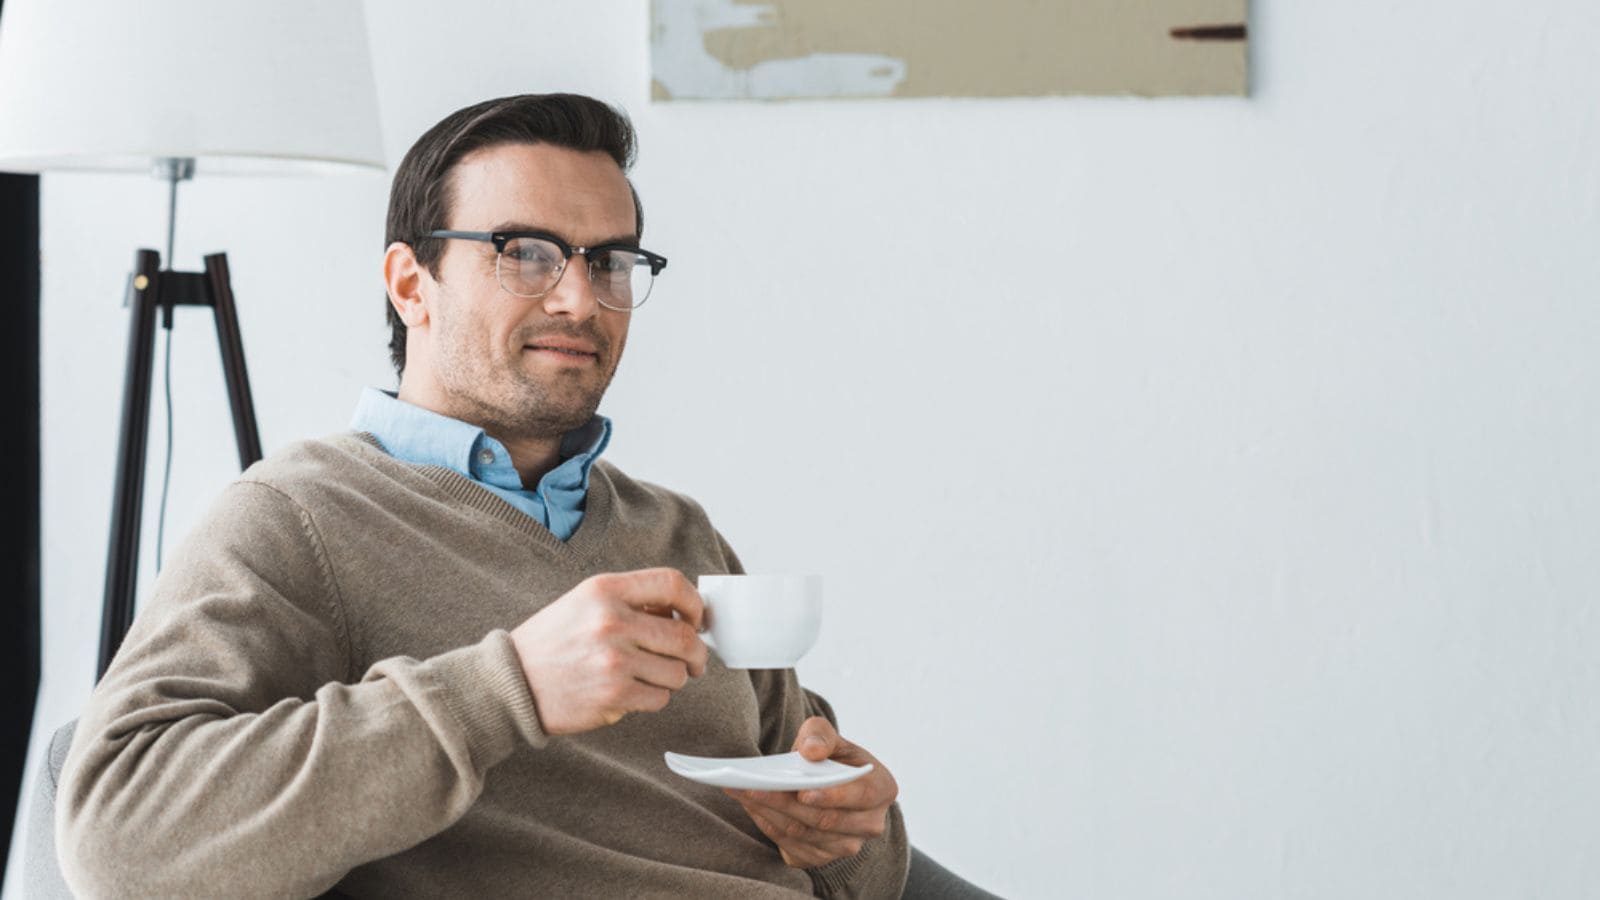 Smiling man in glasses sitting in chair and drinking coffee